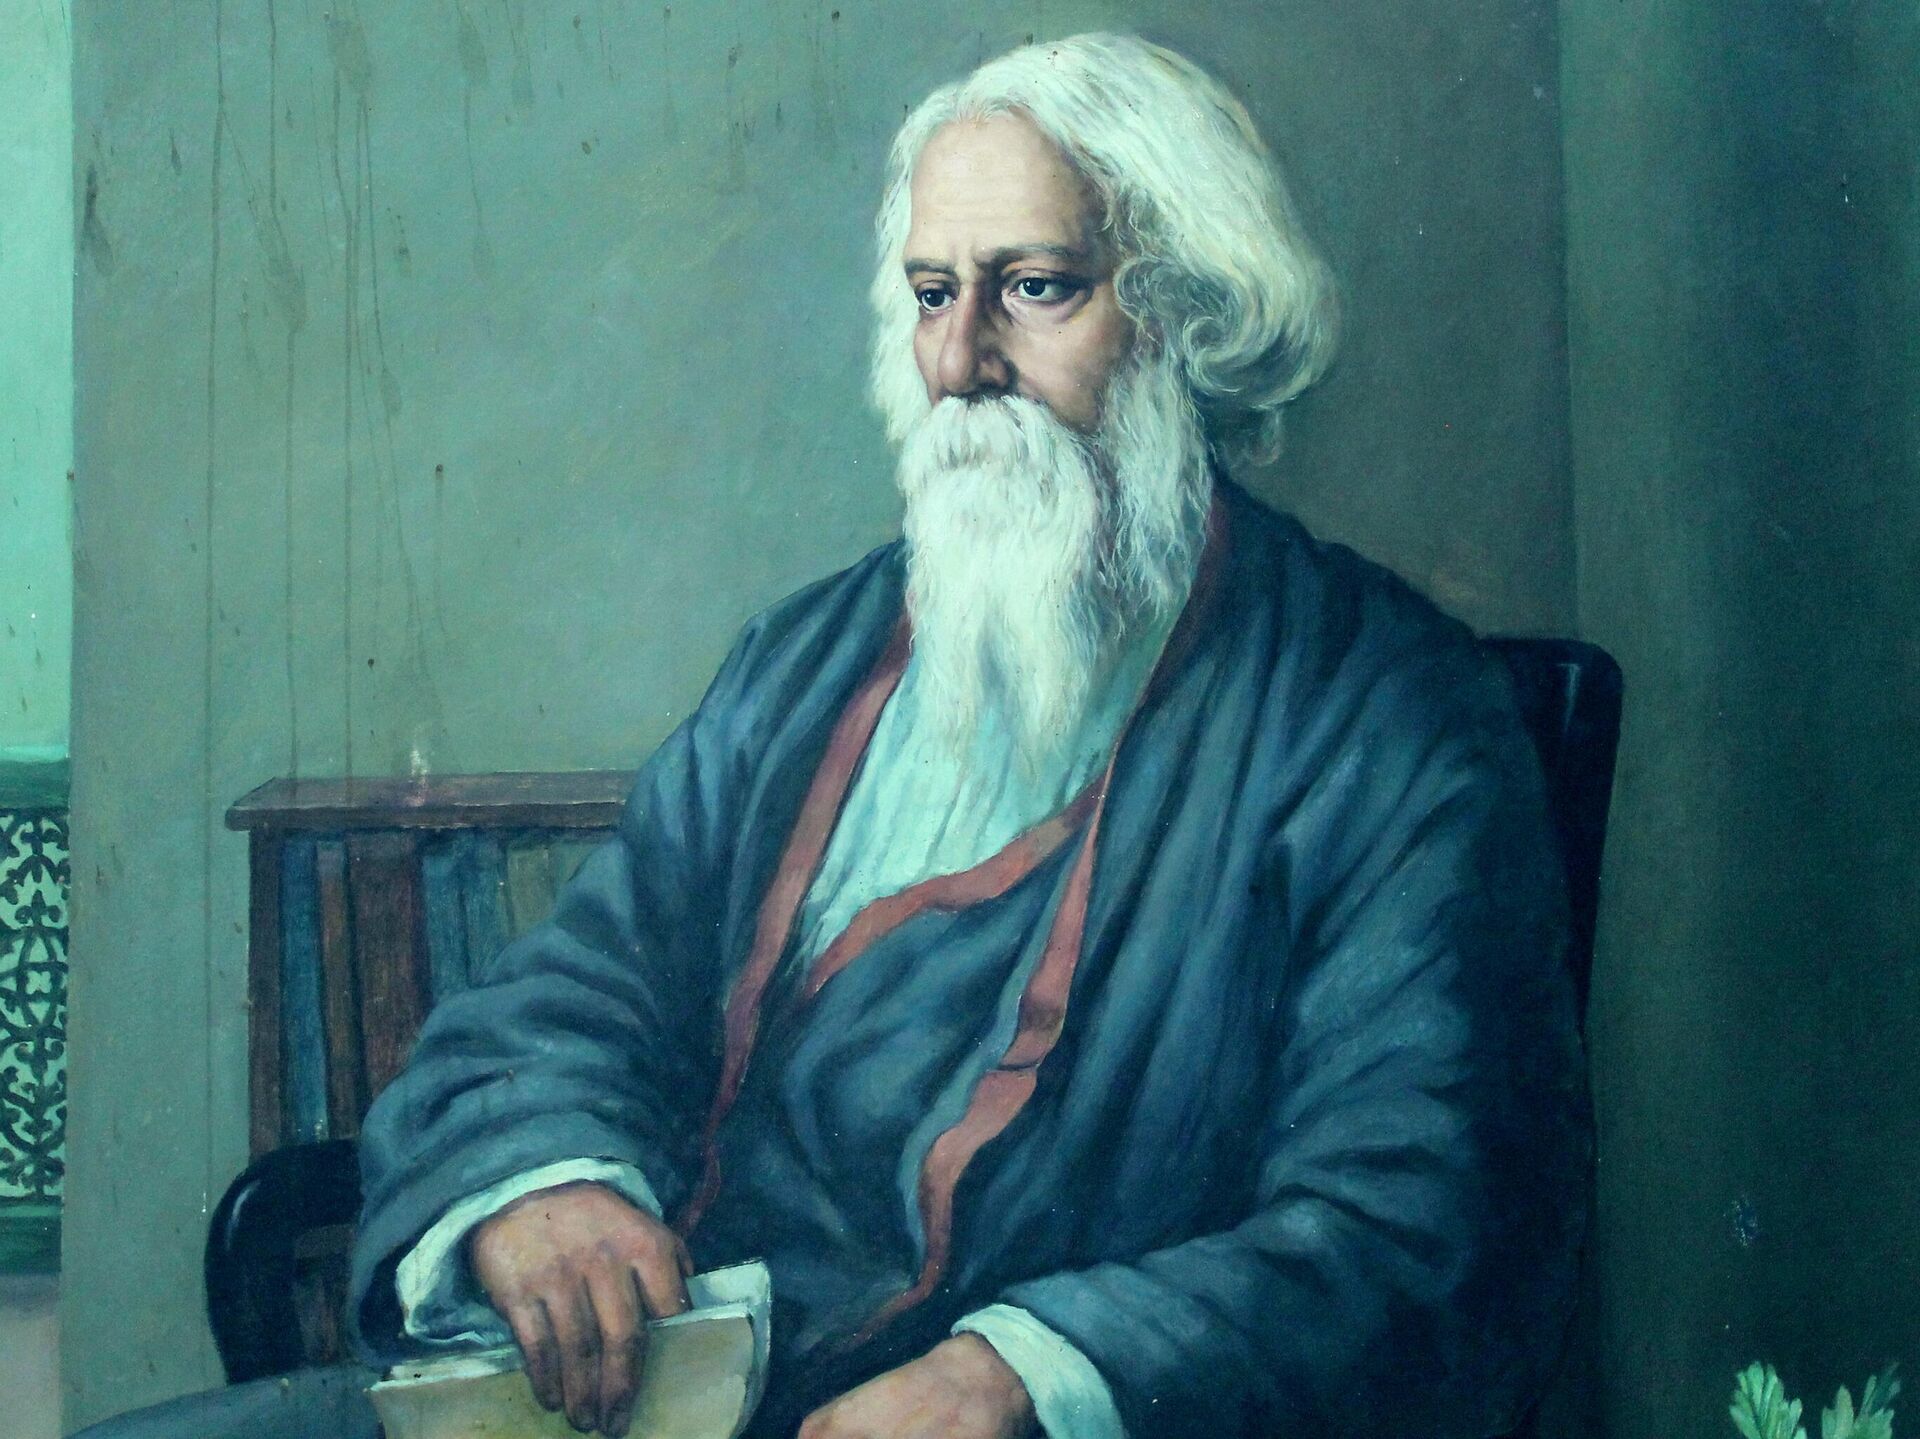 Summary of the Flower-School Poem by Rabindranath Tagore